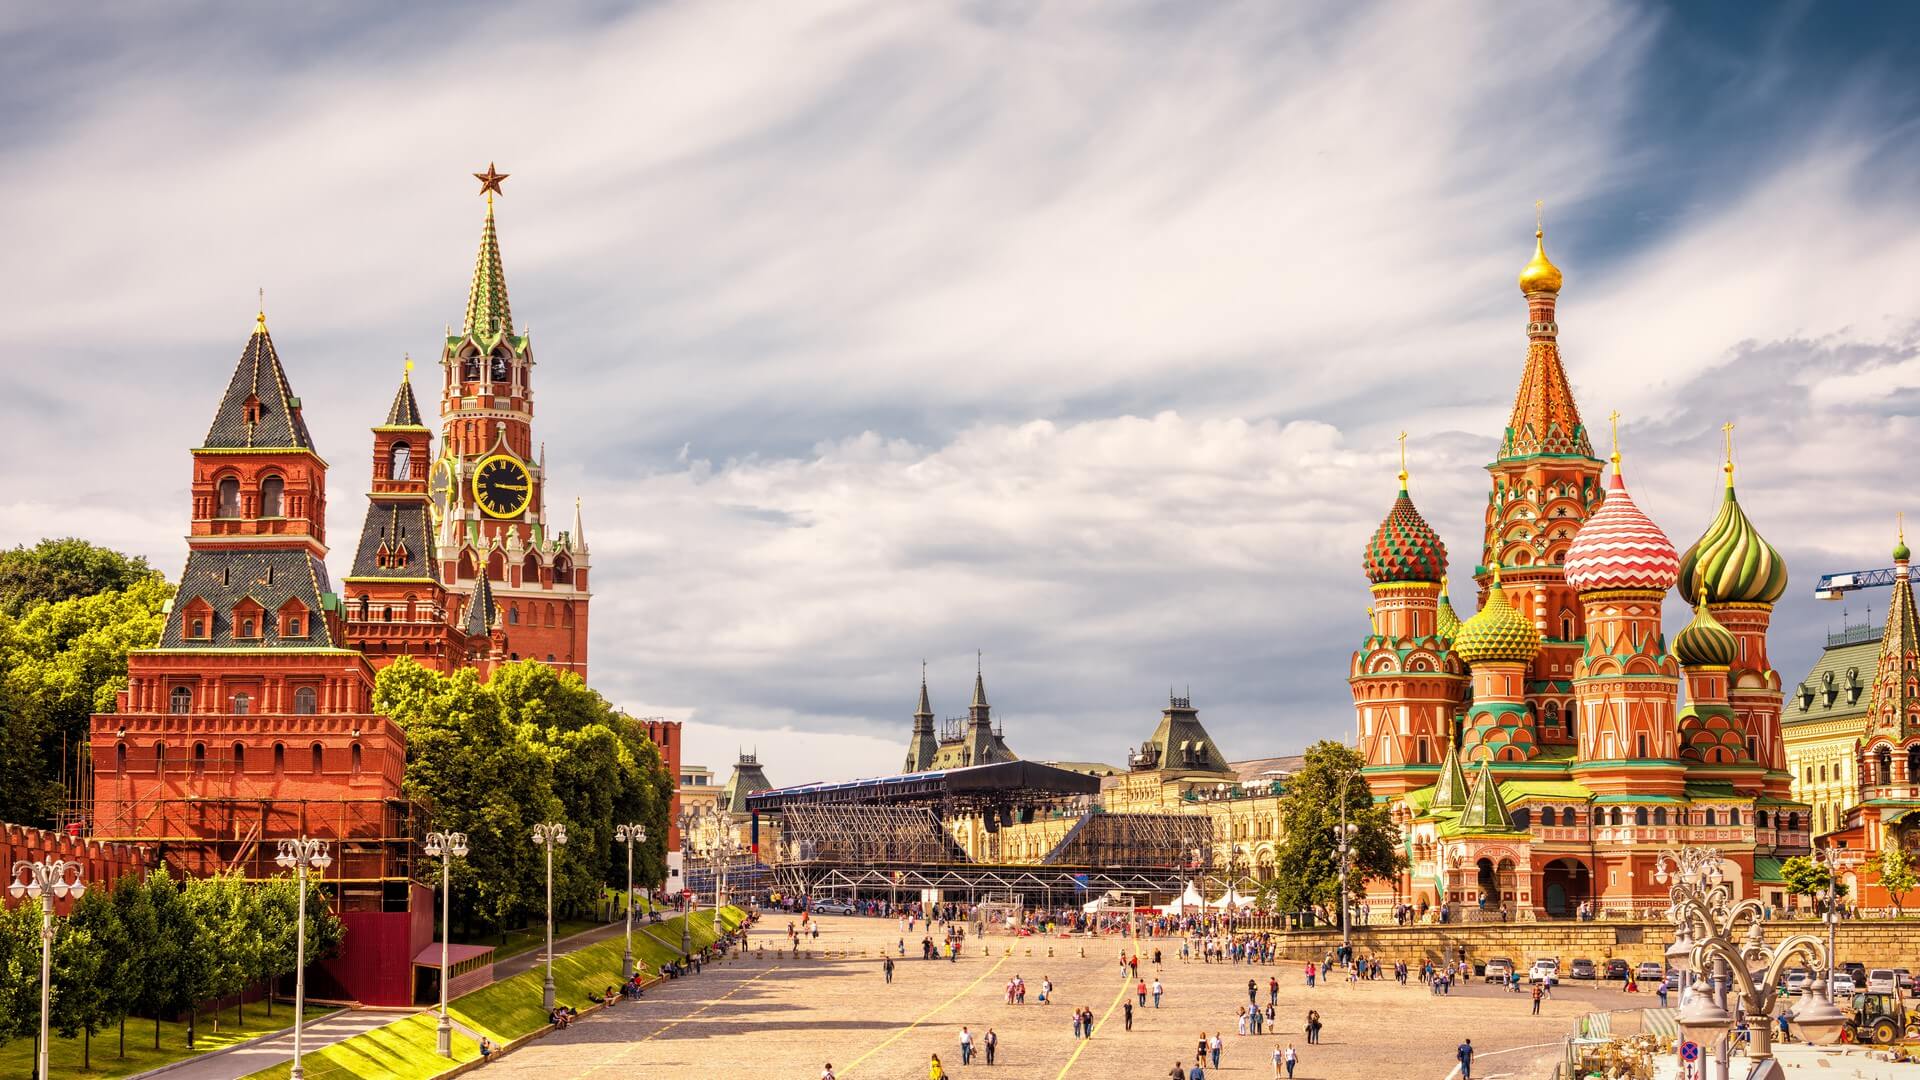 Moscow Kremlin and of St Basil's Cathedral on Red Square, Moscow, Russia. Ancient Moscow Kremlin is the main tourist attraction of city. Beautiful panoramic view of the heart of Moscow on sunny day.
